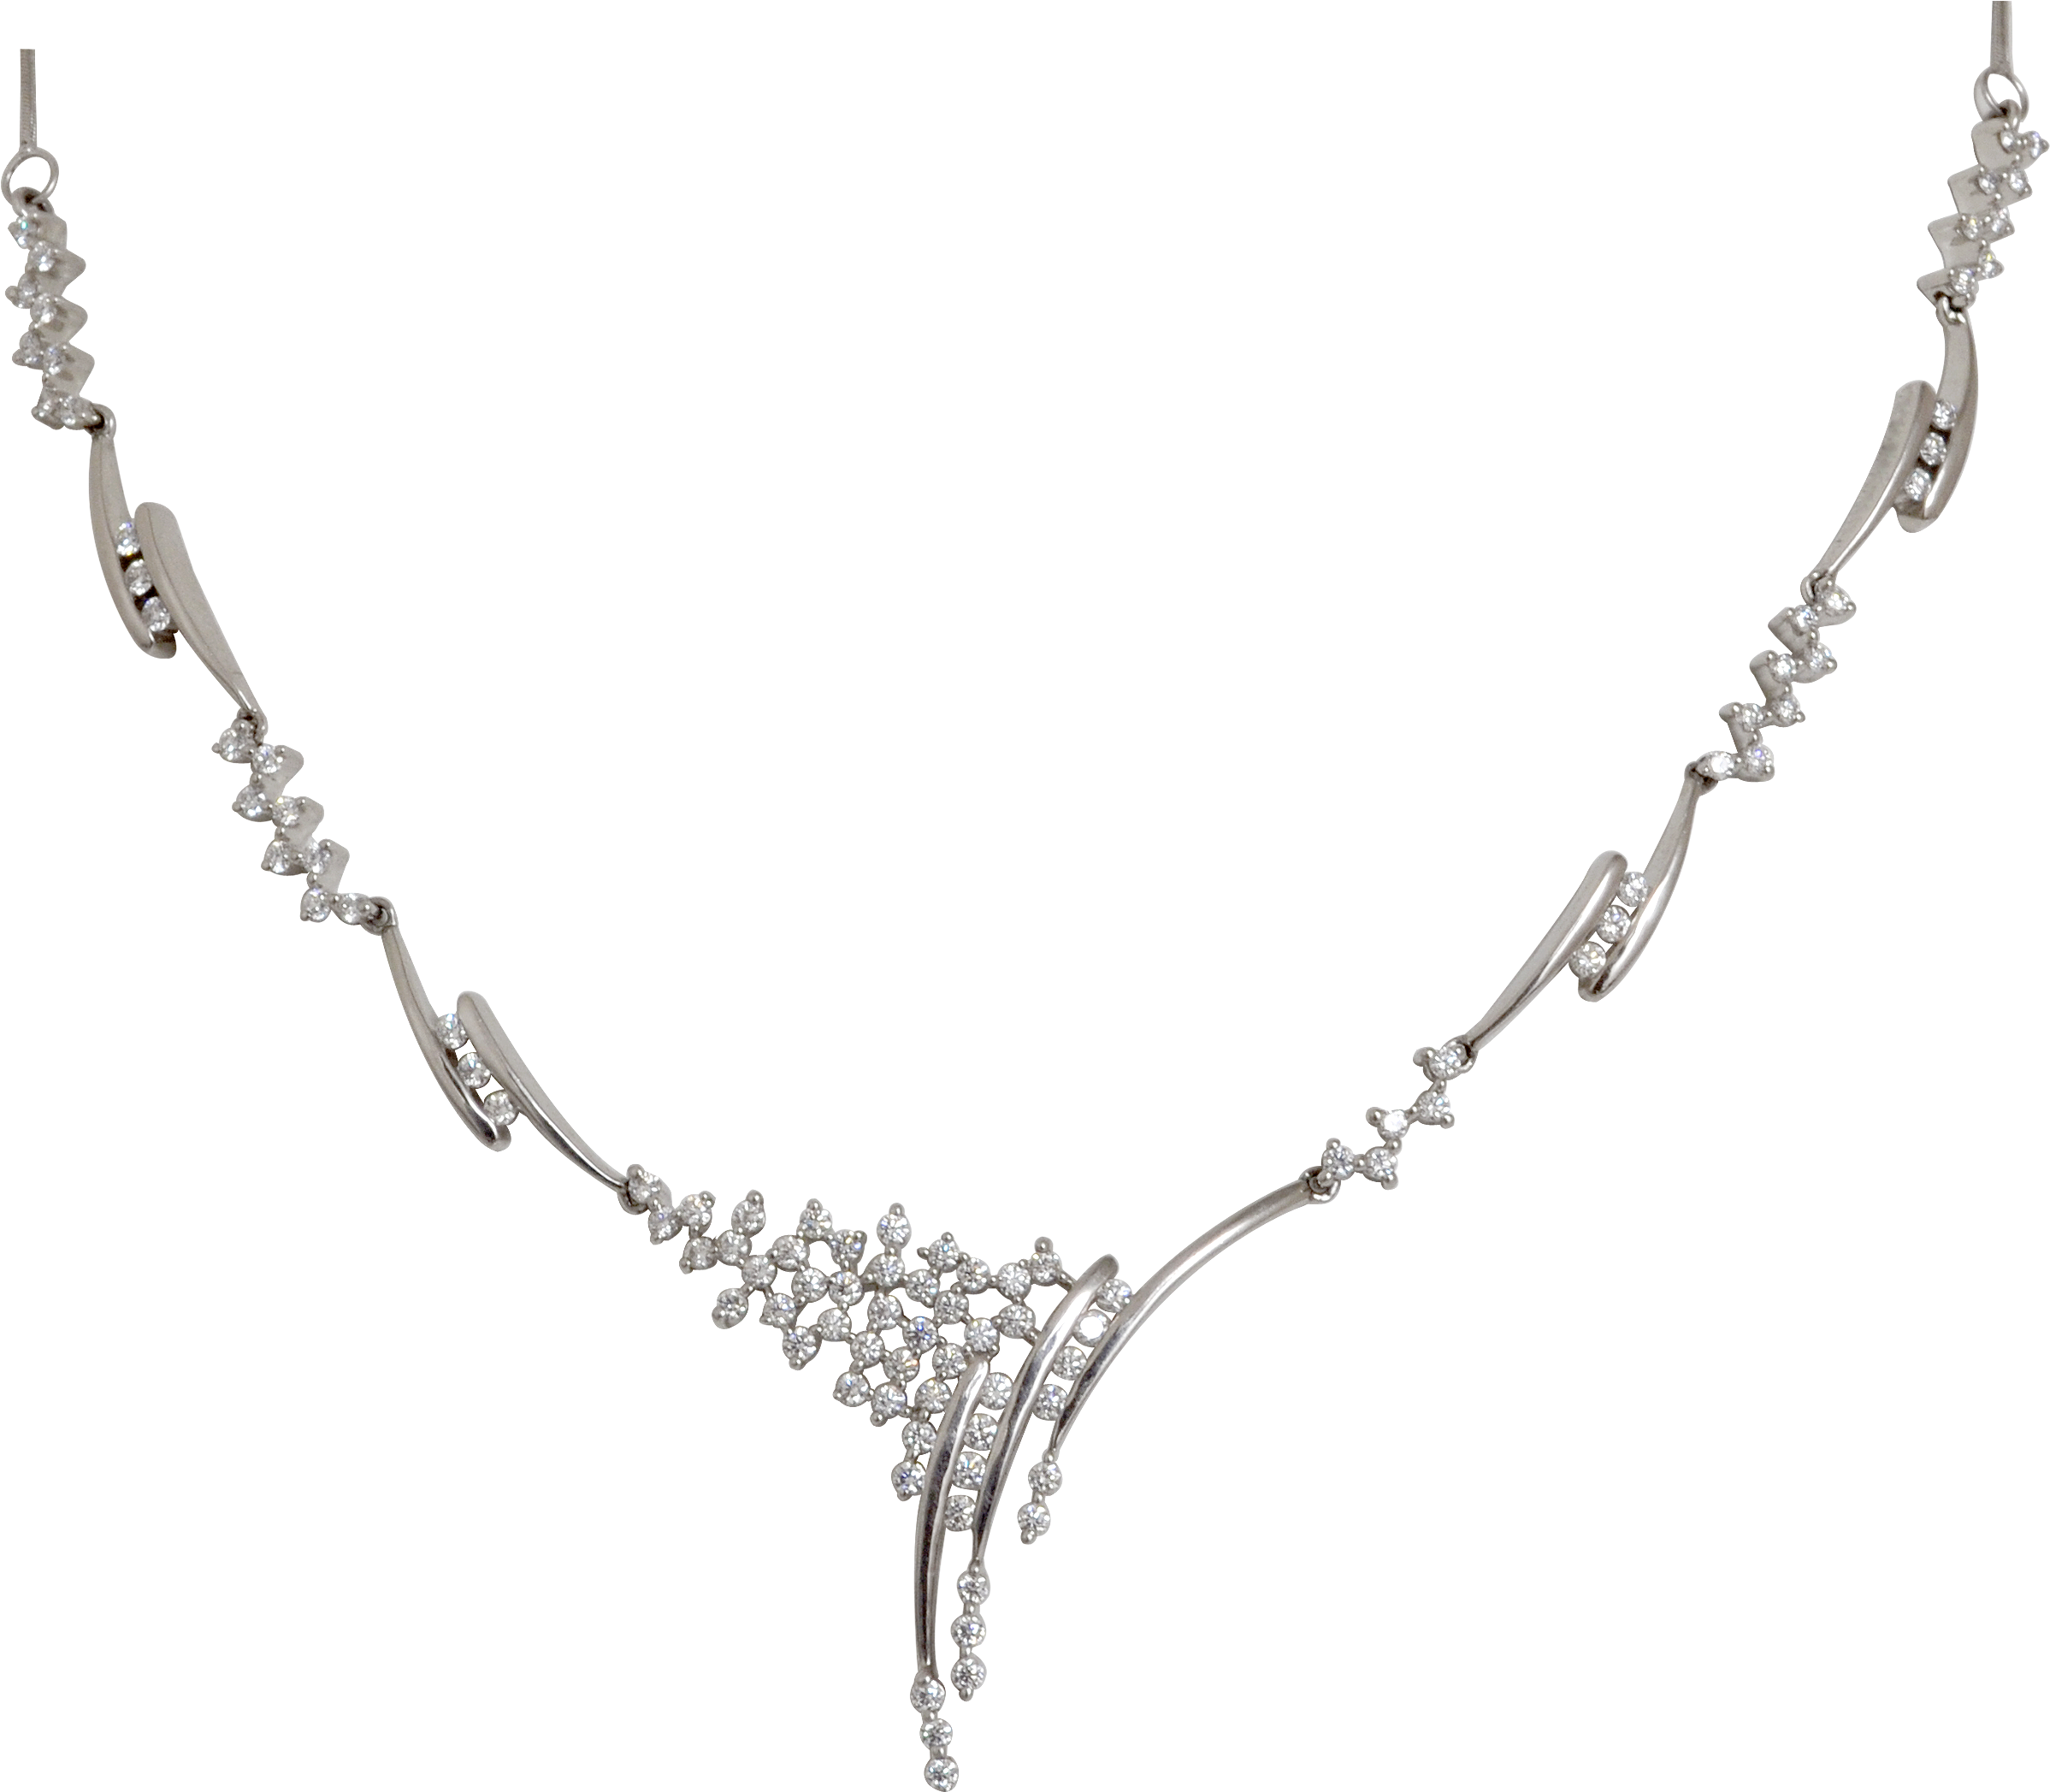 A Silver Necklace With Diamonds